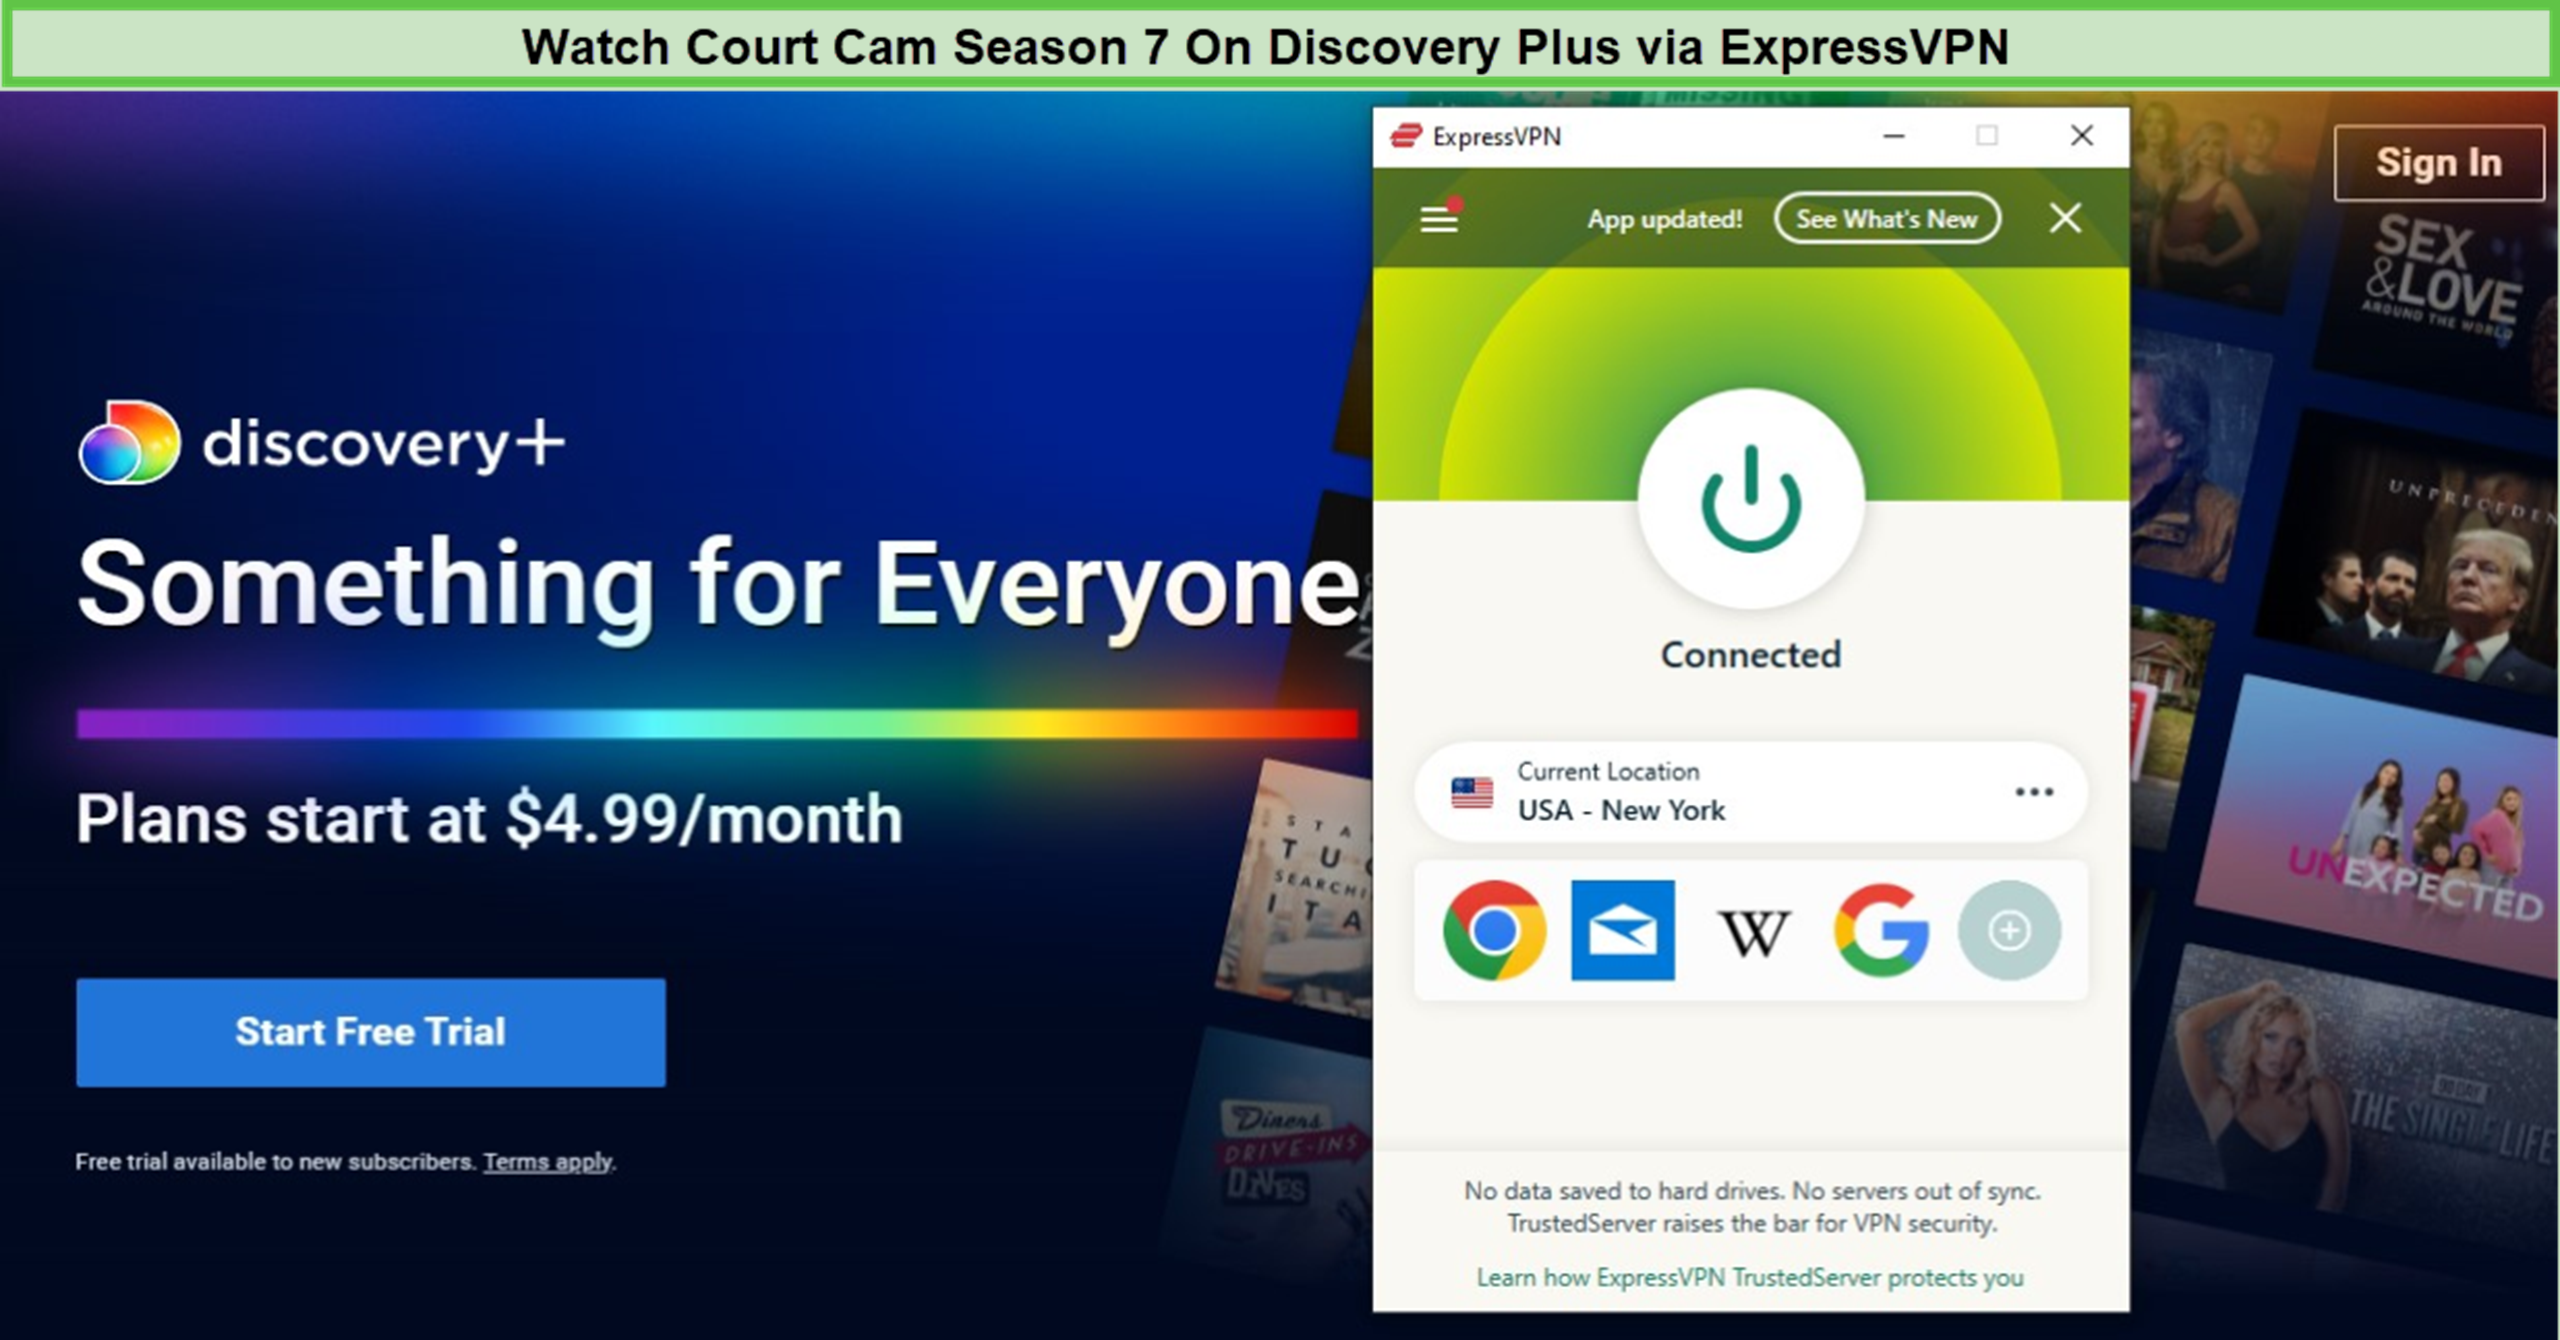 Watch-Court-Cam-Season-7-in-South Korea-on-Discovery-Plus-With-ExpressVPN